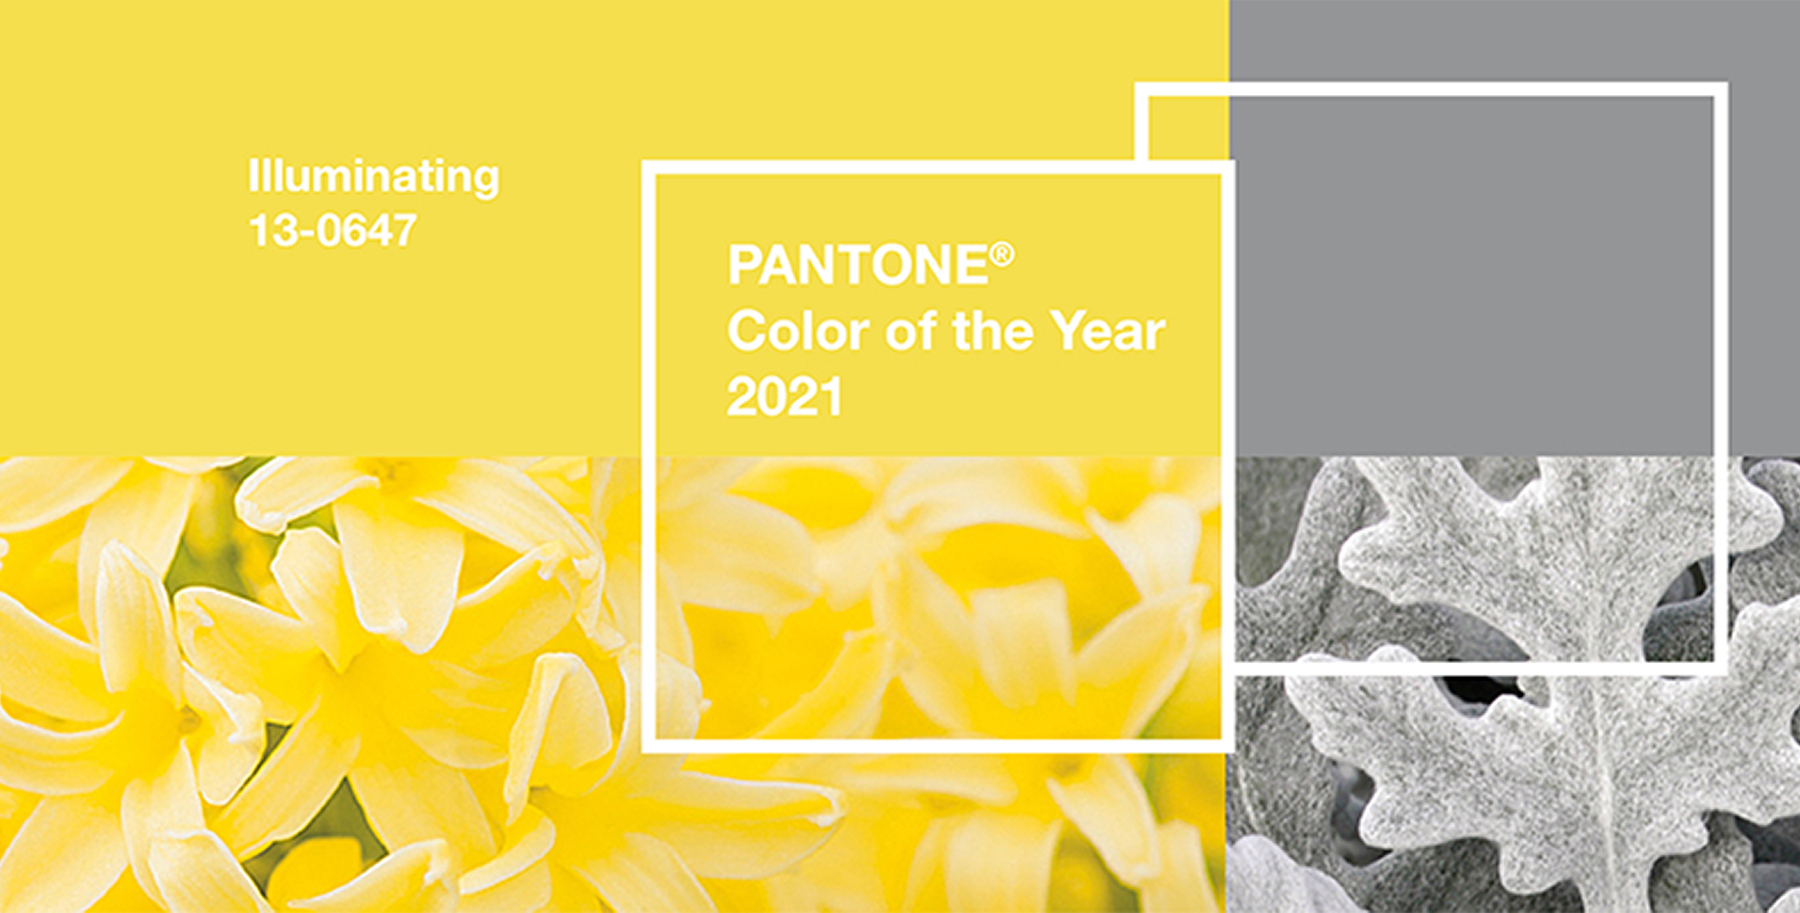 Pantone Color of the year 2021